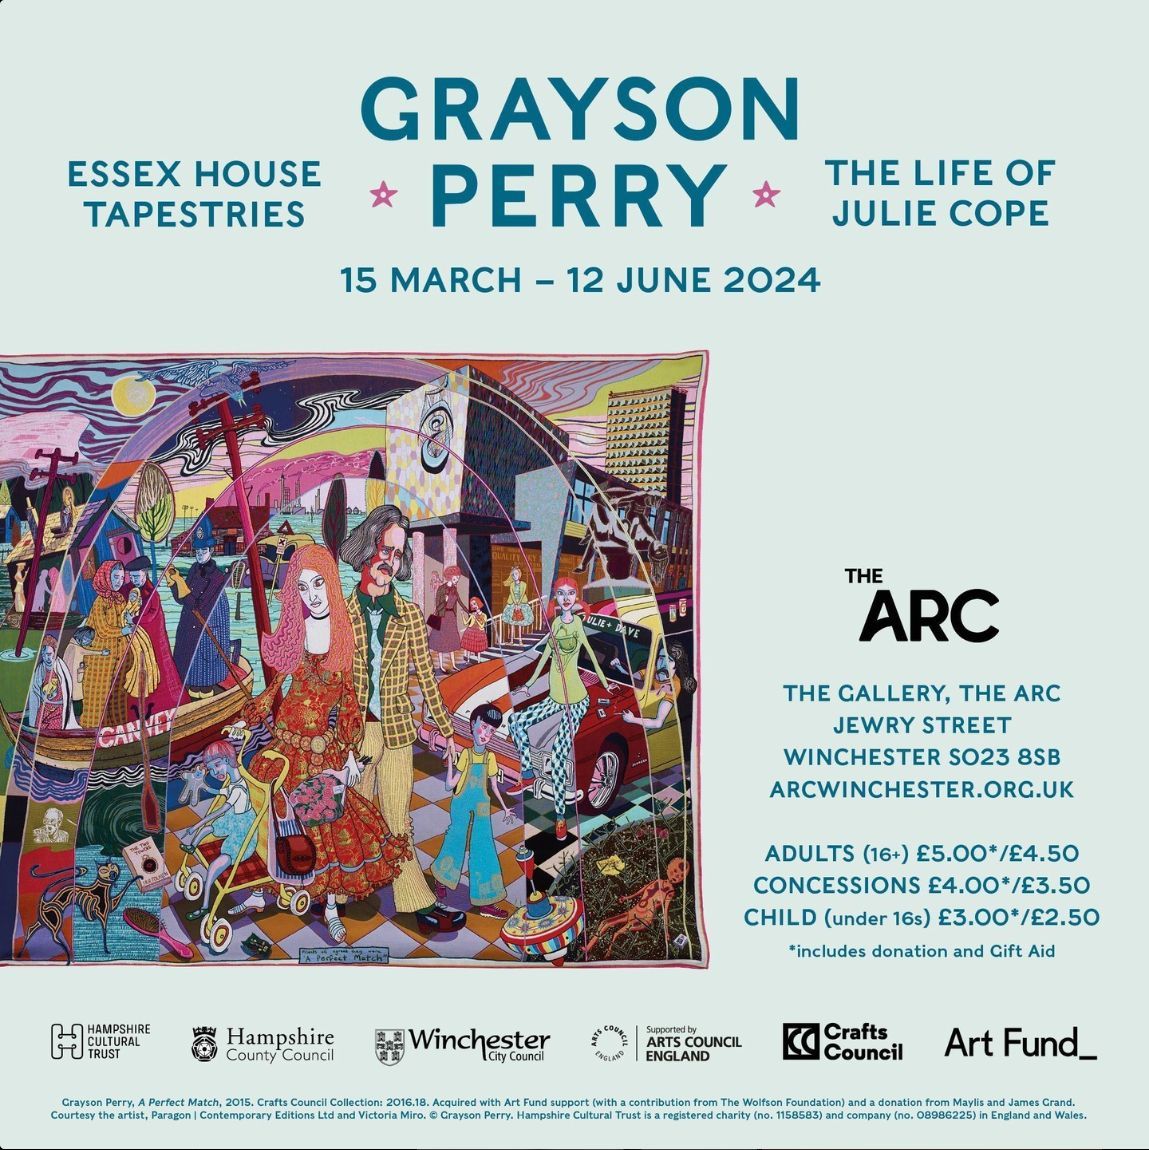 This exciting exhibition of stunning tapestries by multi-award-winning artist Grayson Perry continues at The Gallery here in Winchester. The exhibition runs until the 12th of June. To find out more and book tickets click here: buff.ly/49PeHOl